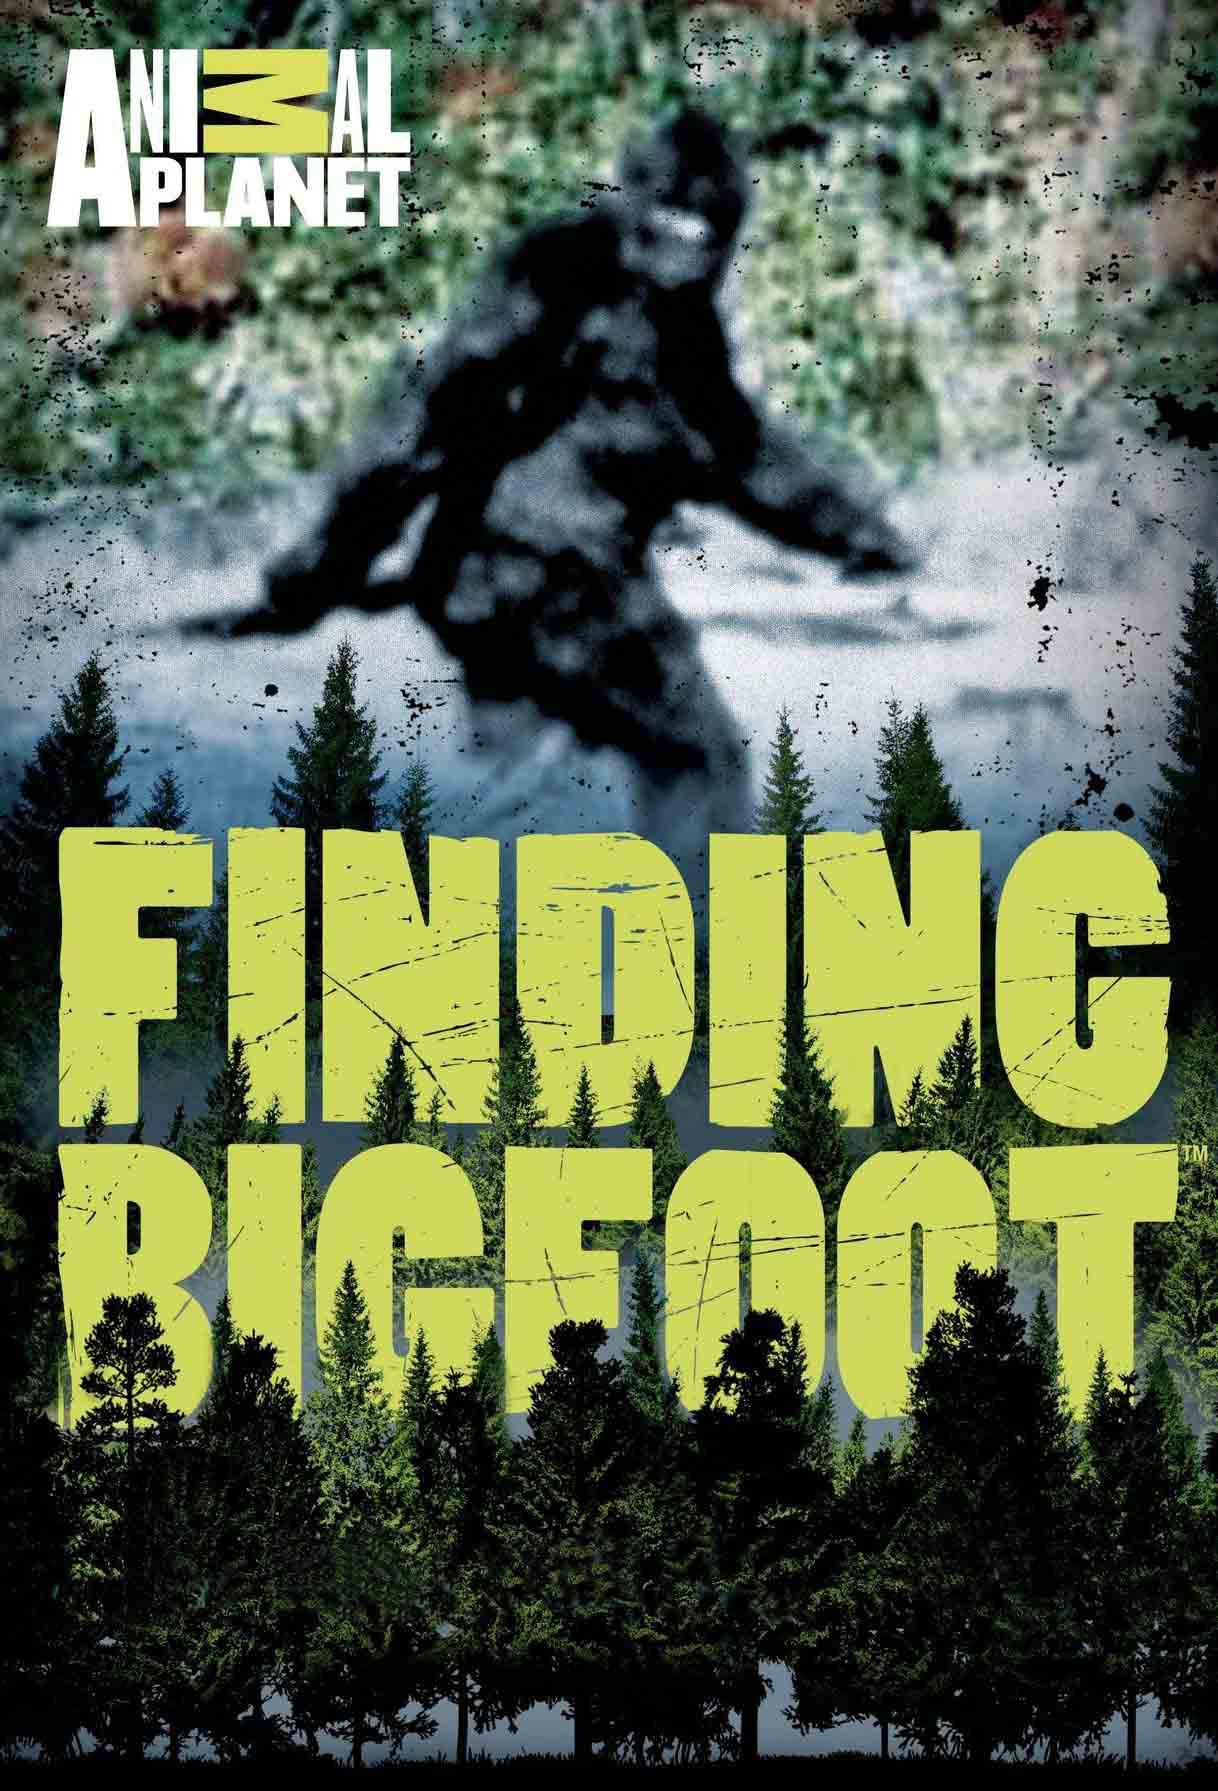 Finding Bigfoot (Animal Planet): United States daily TV audience insights  for smarter content decisions - Parrot Analytics